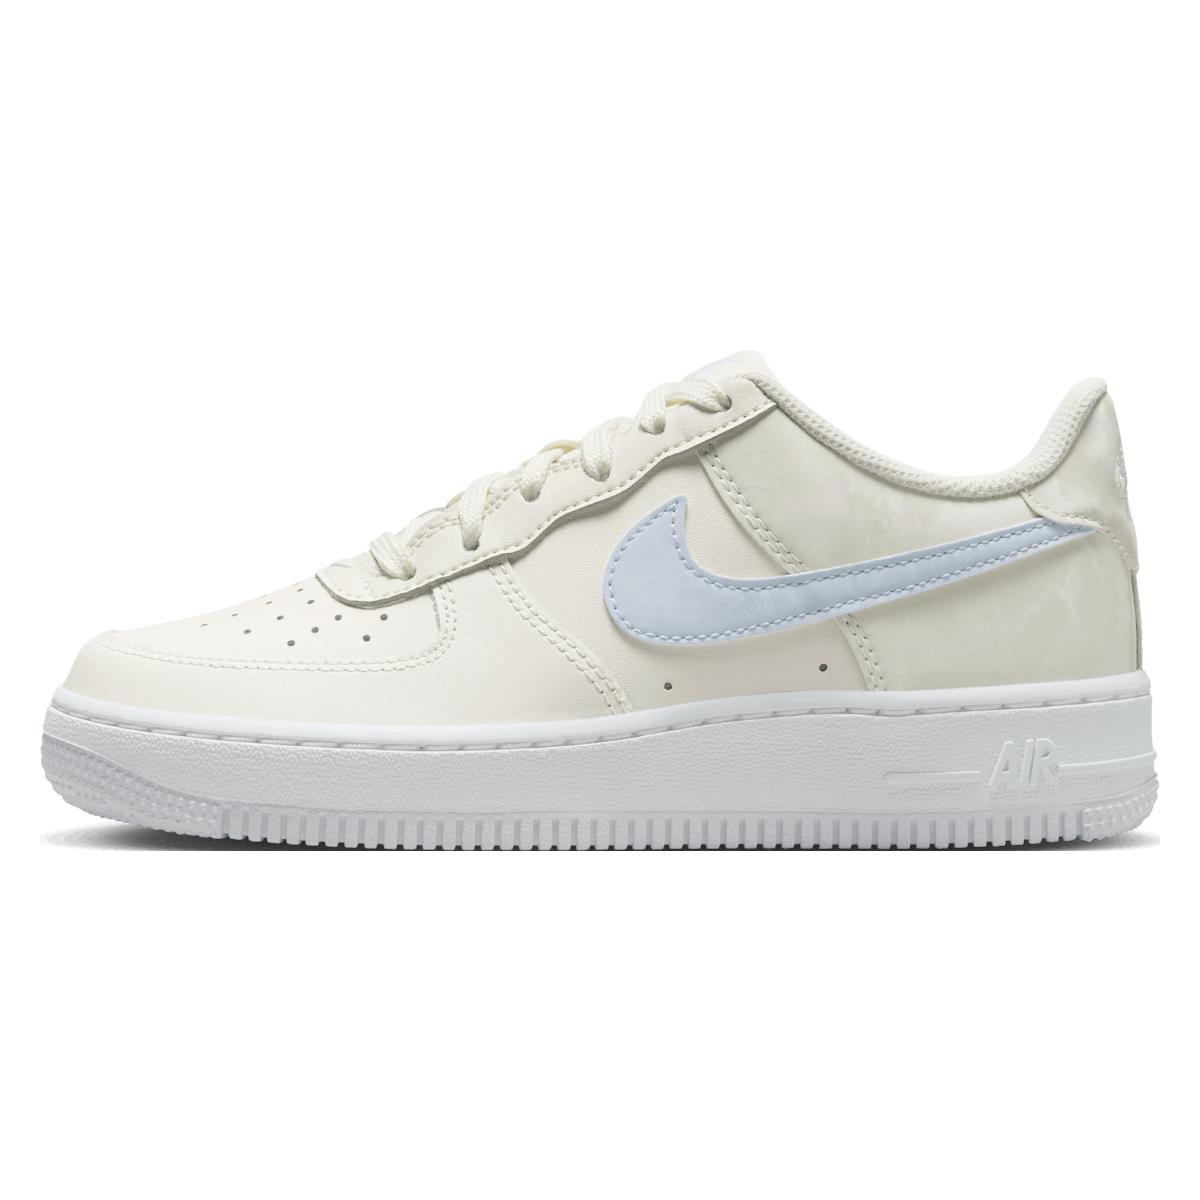 Nike Air Force 1 GS "Pale Ivory"